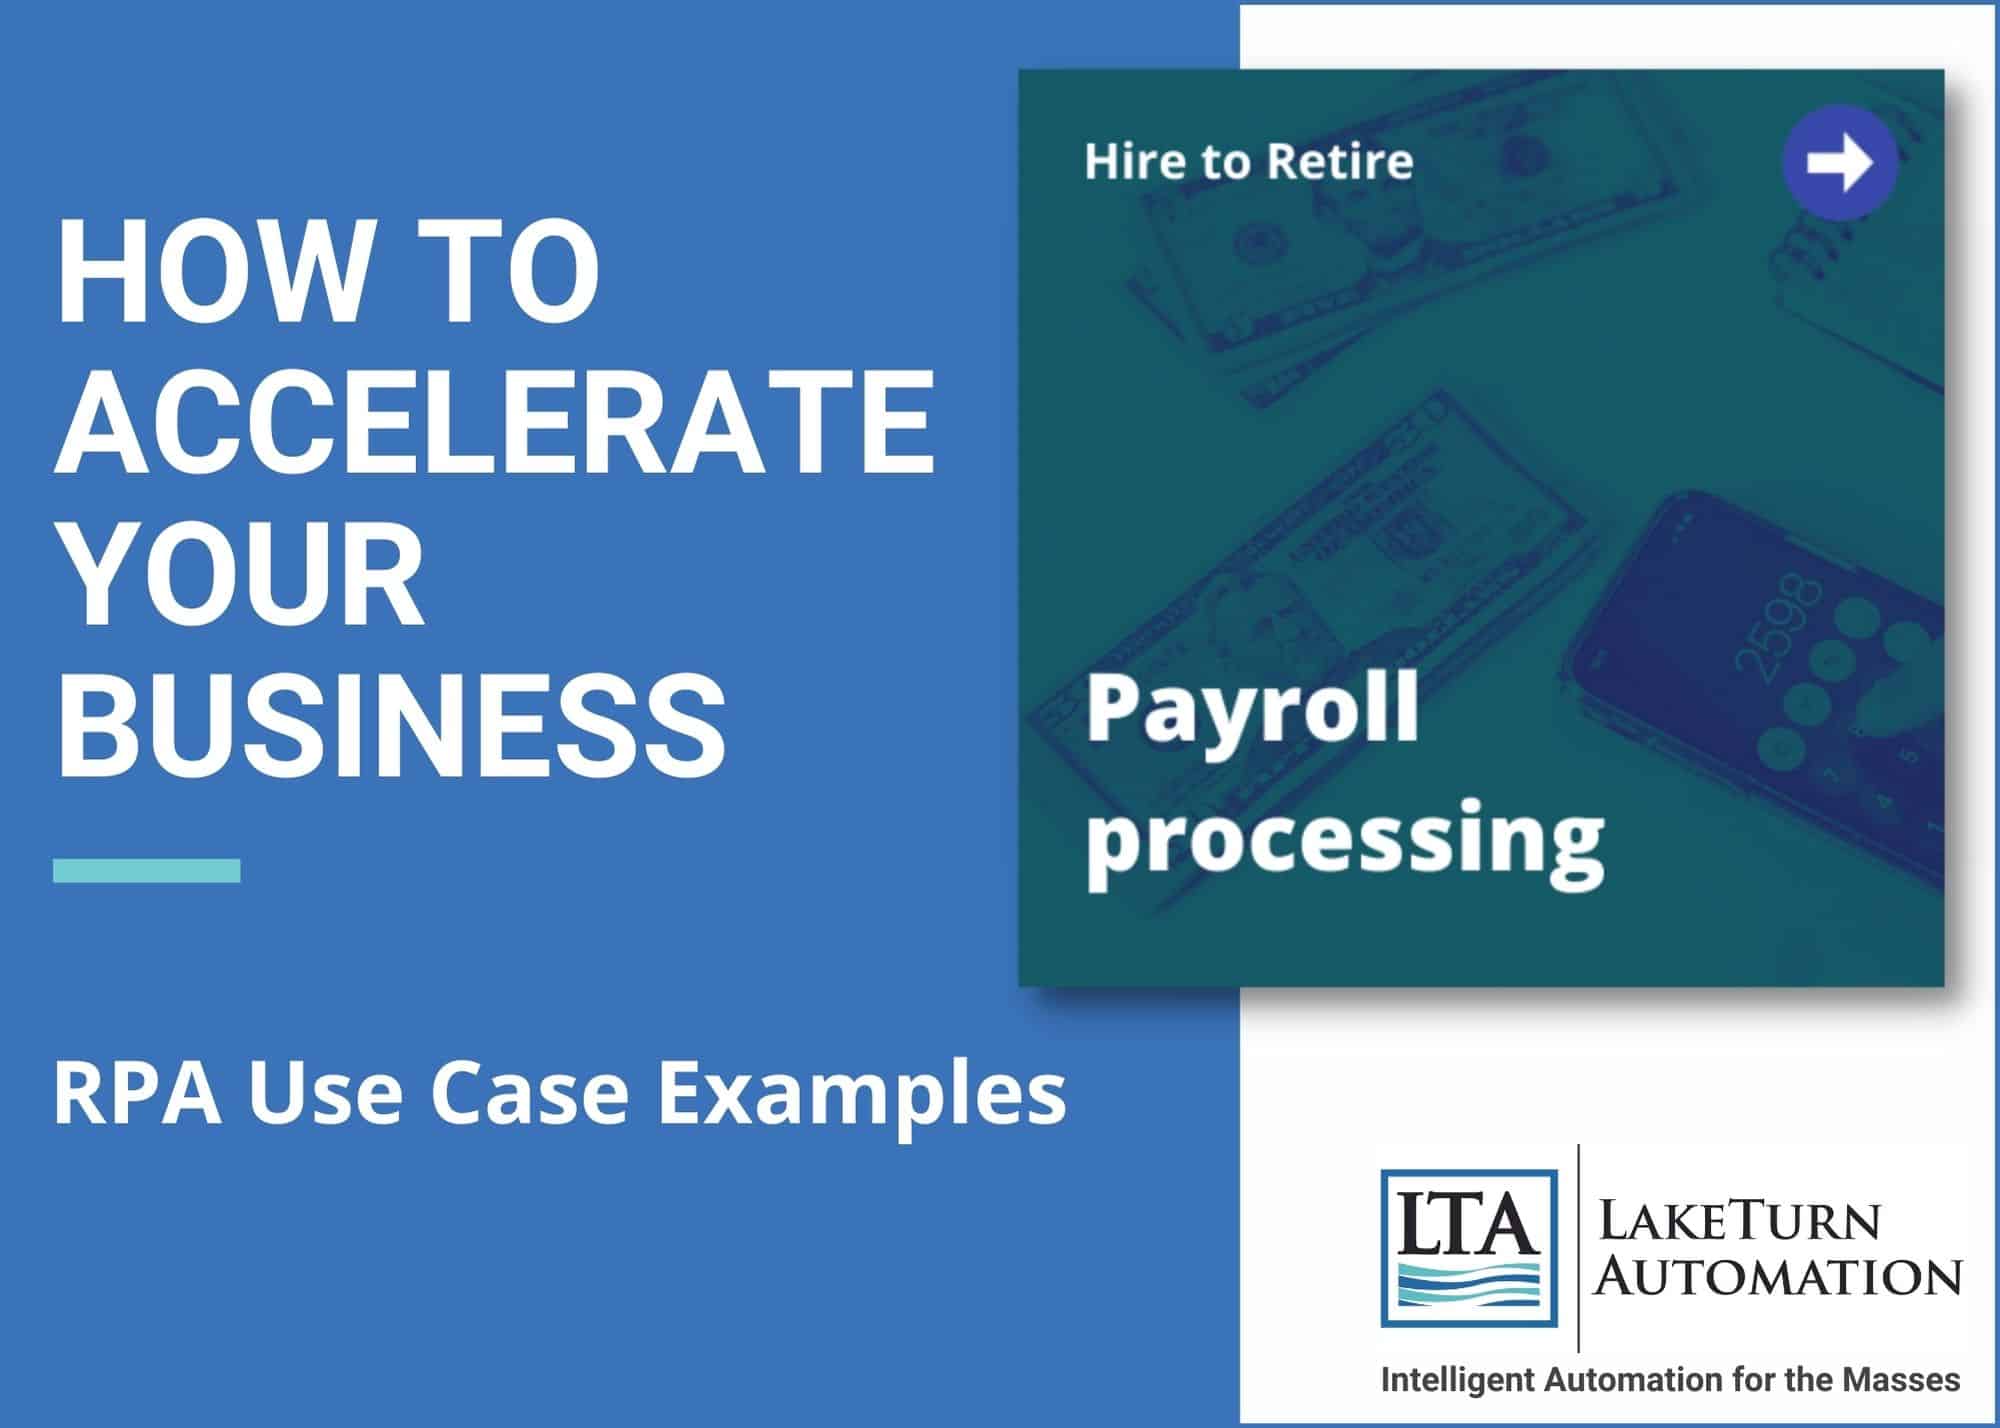 Payroll Processing Use Case